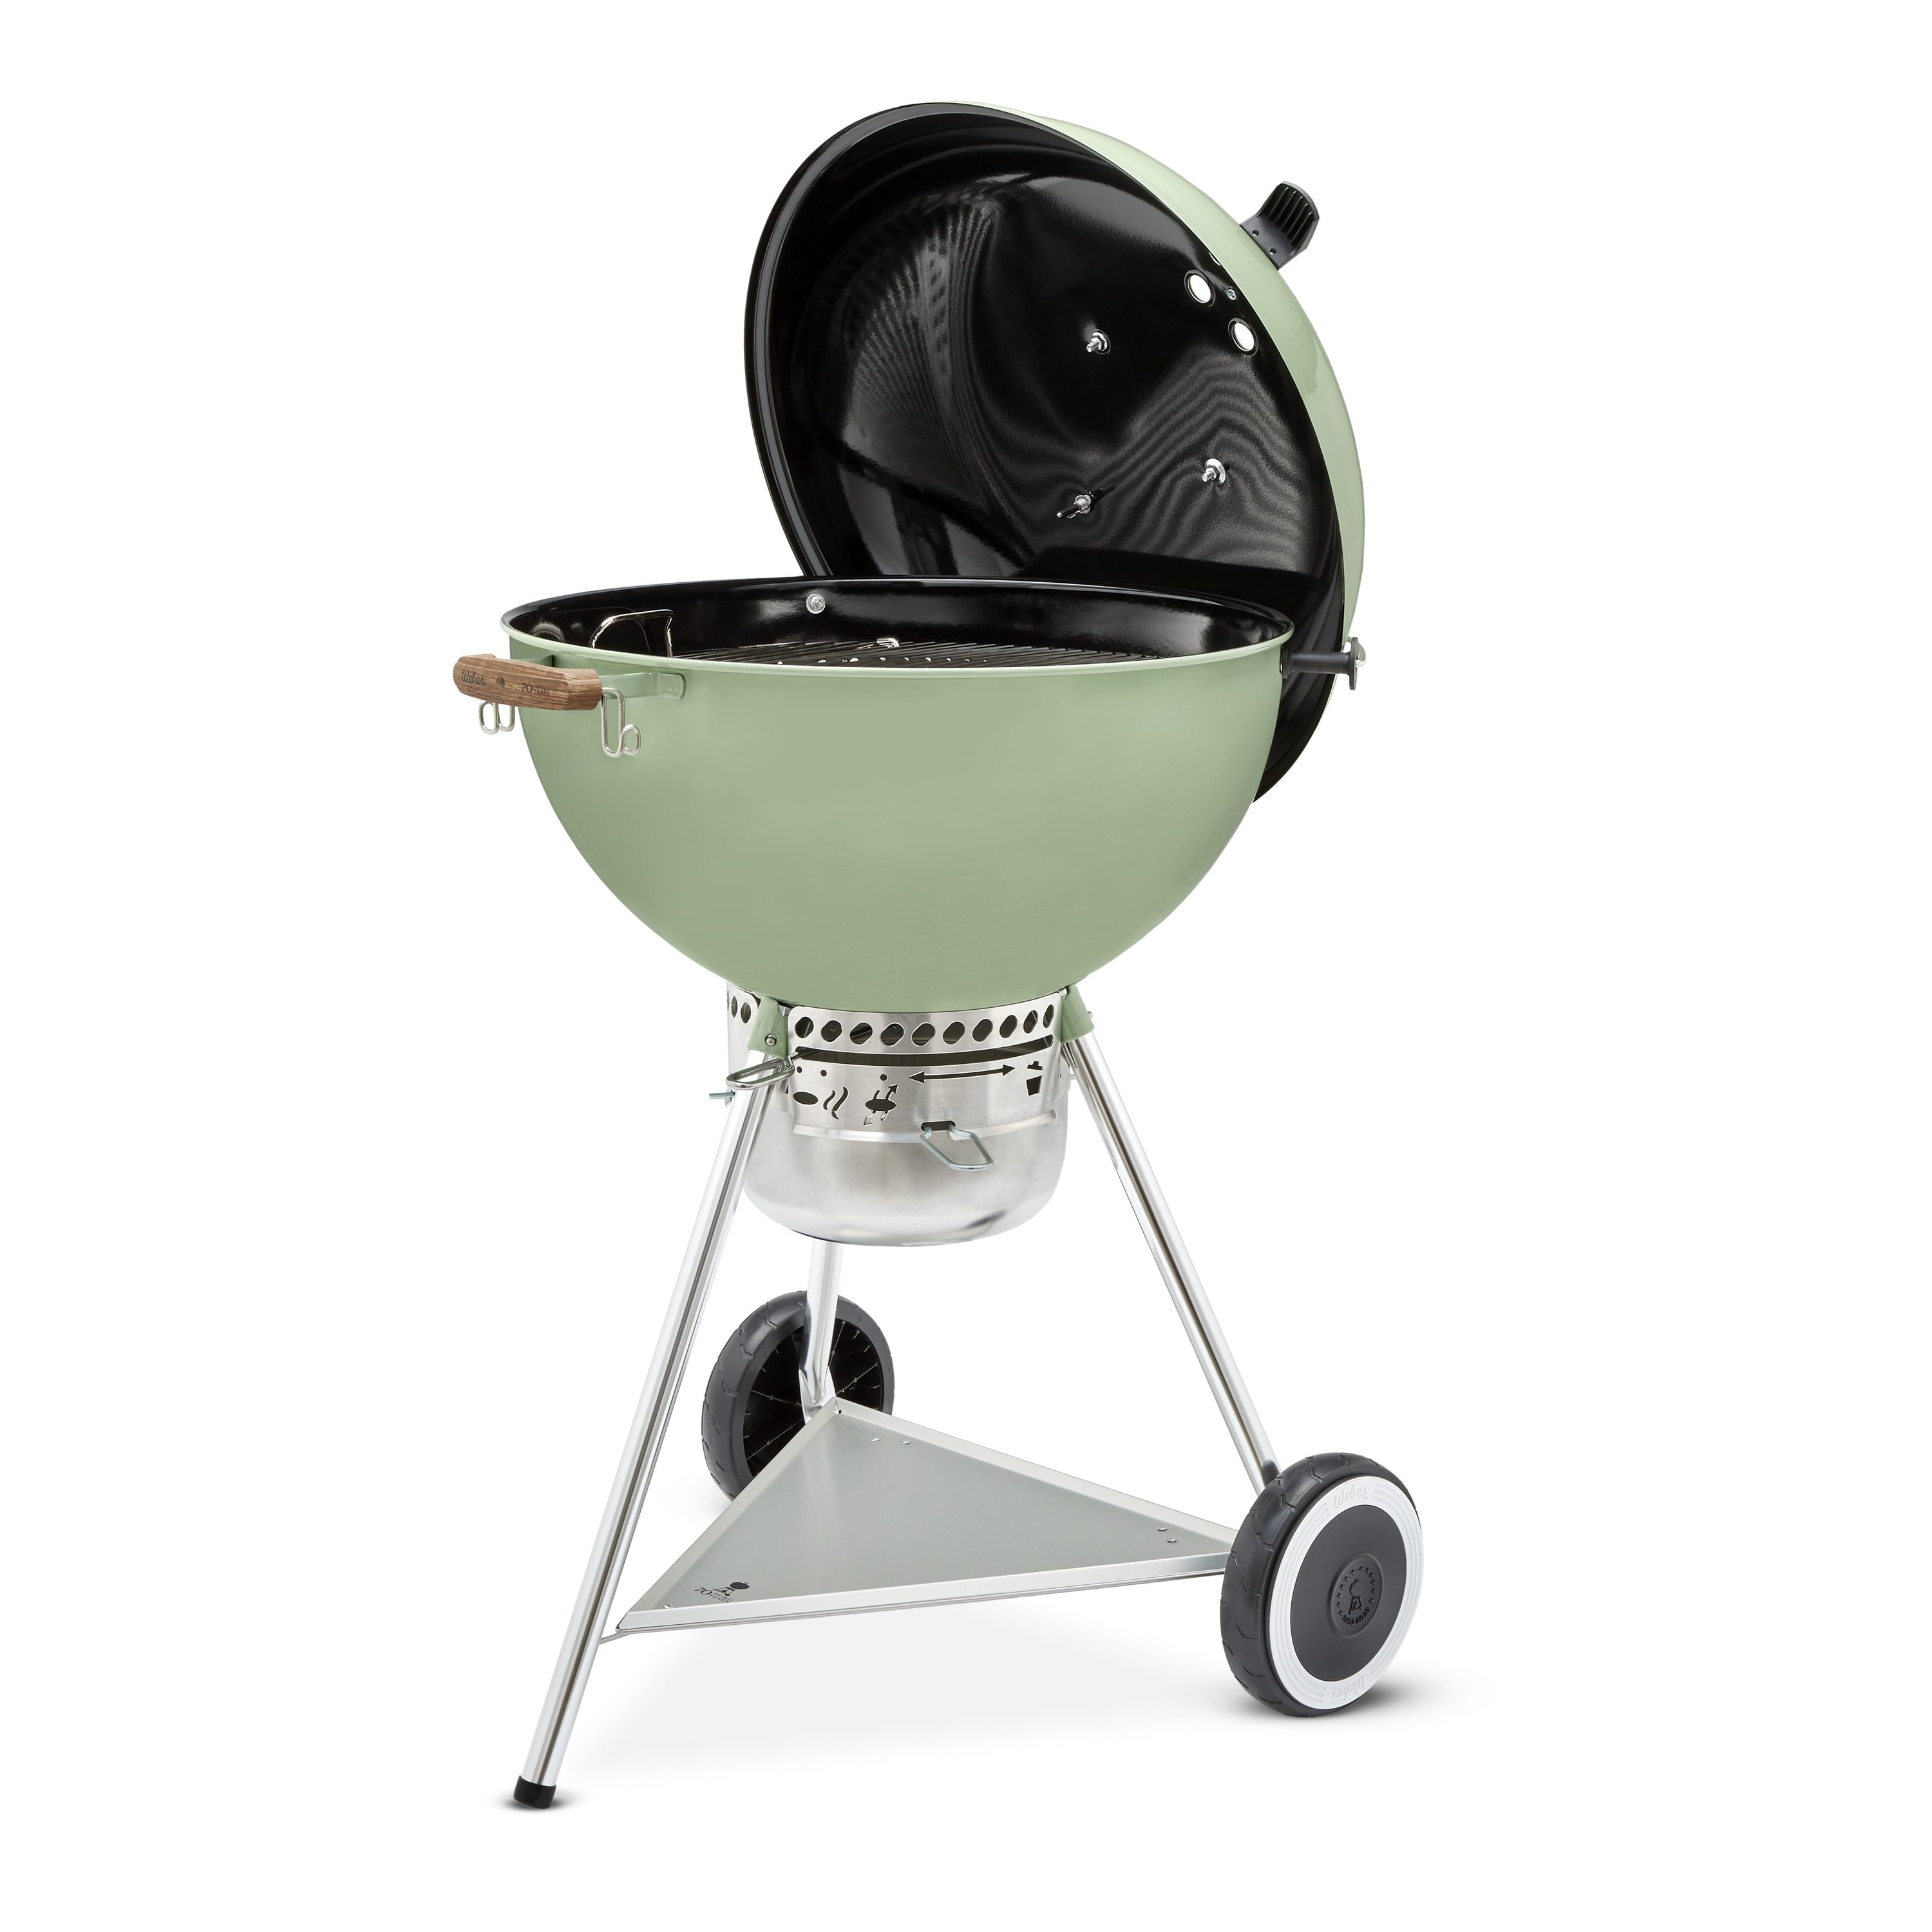 Shop Weber 22 Kettle Charcoal Grill Parts at